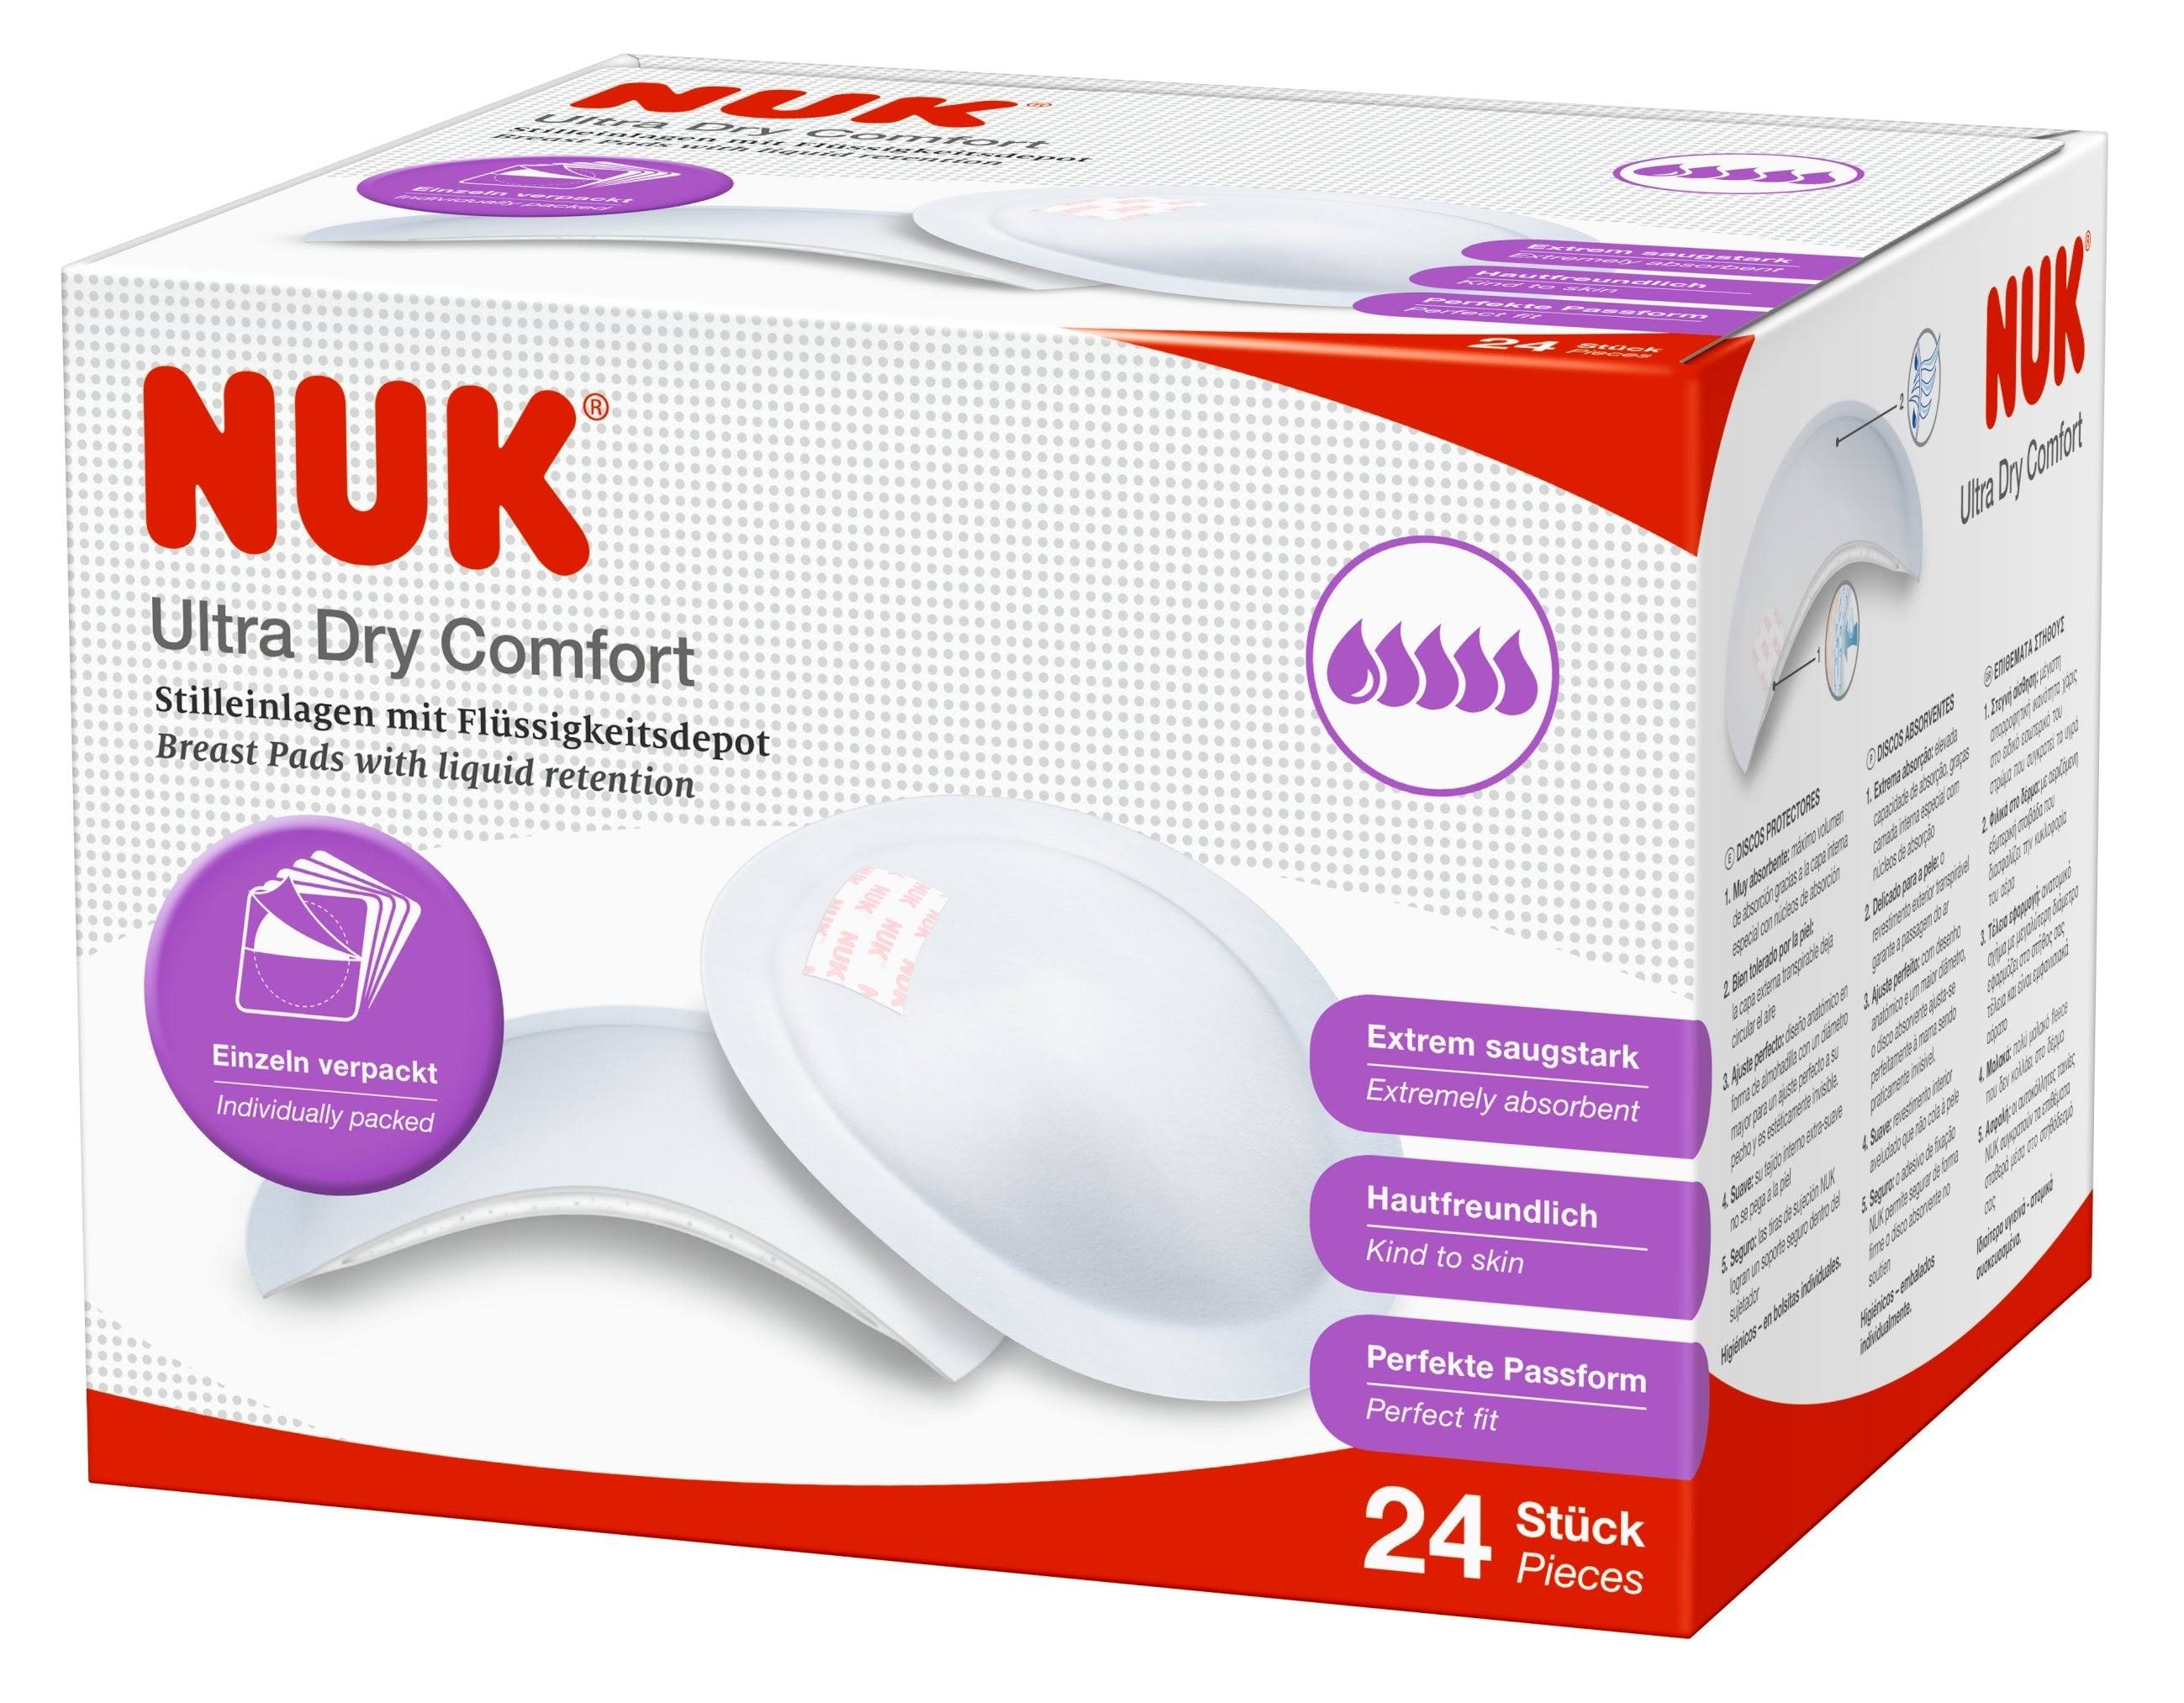 NUK Ultra Dry Comfort Breast Pads - 24 Pieces